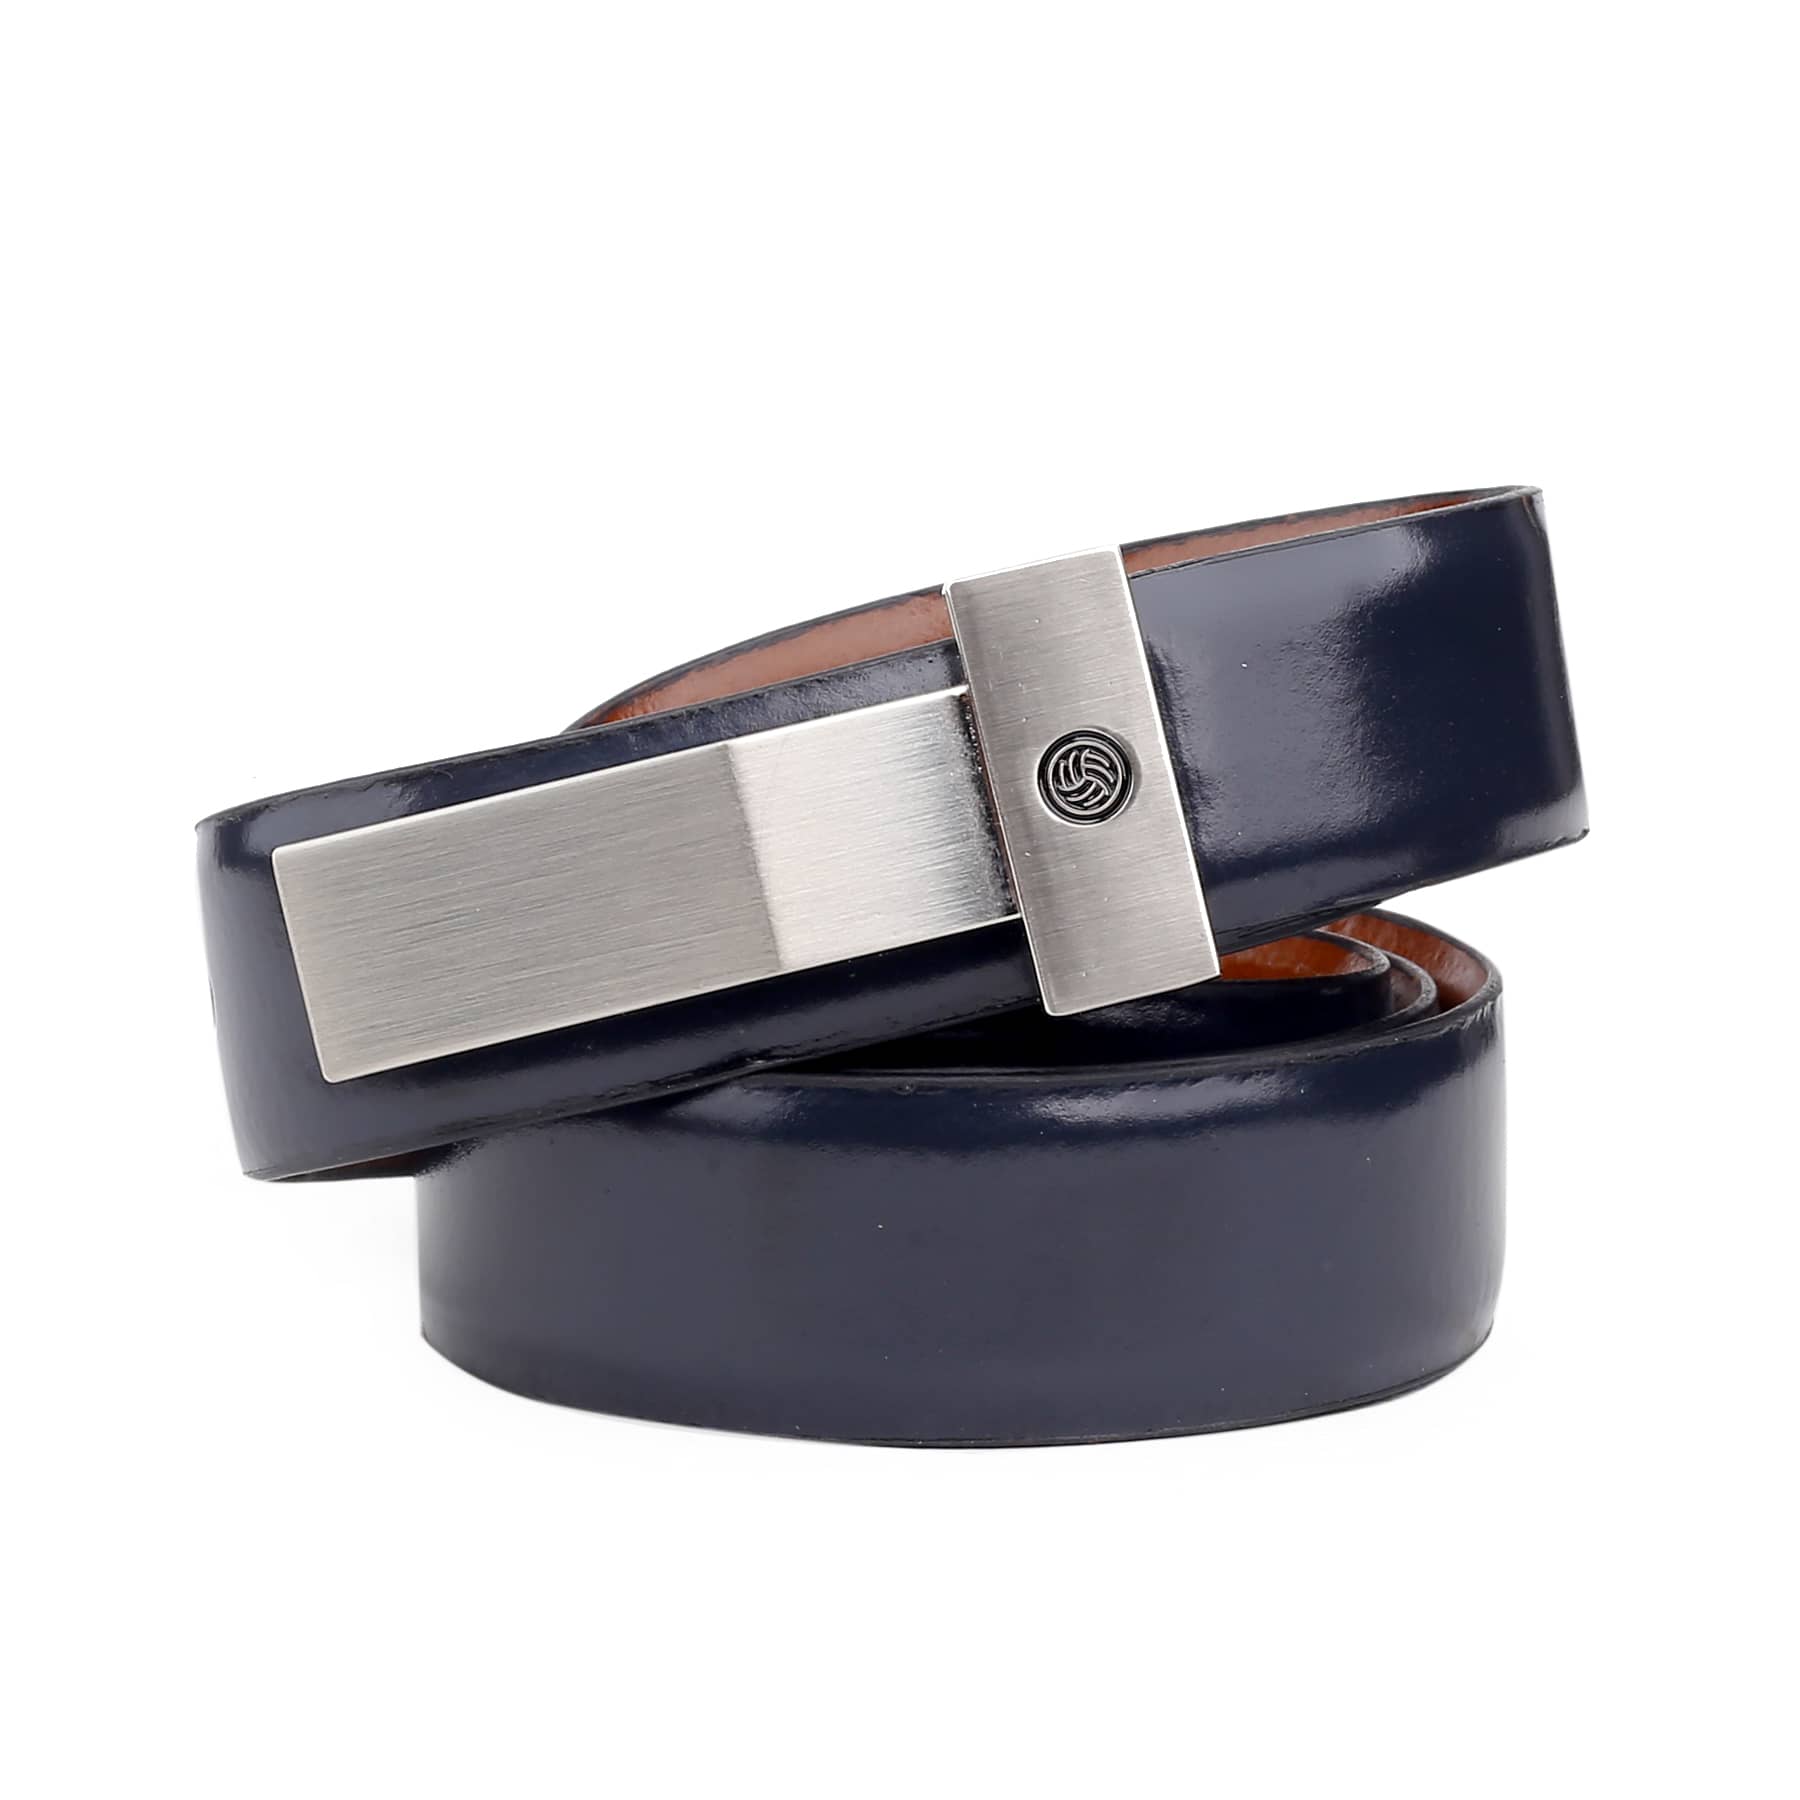 Bacca Bucci Genuine Leather Formal Dress Belts with a Glossy Finish and a Nickel-Free Buckle